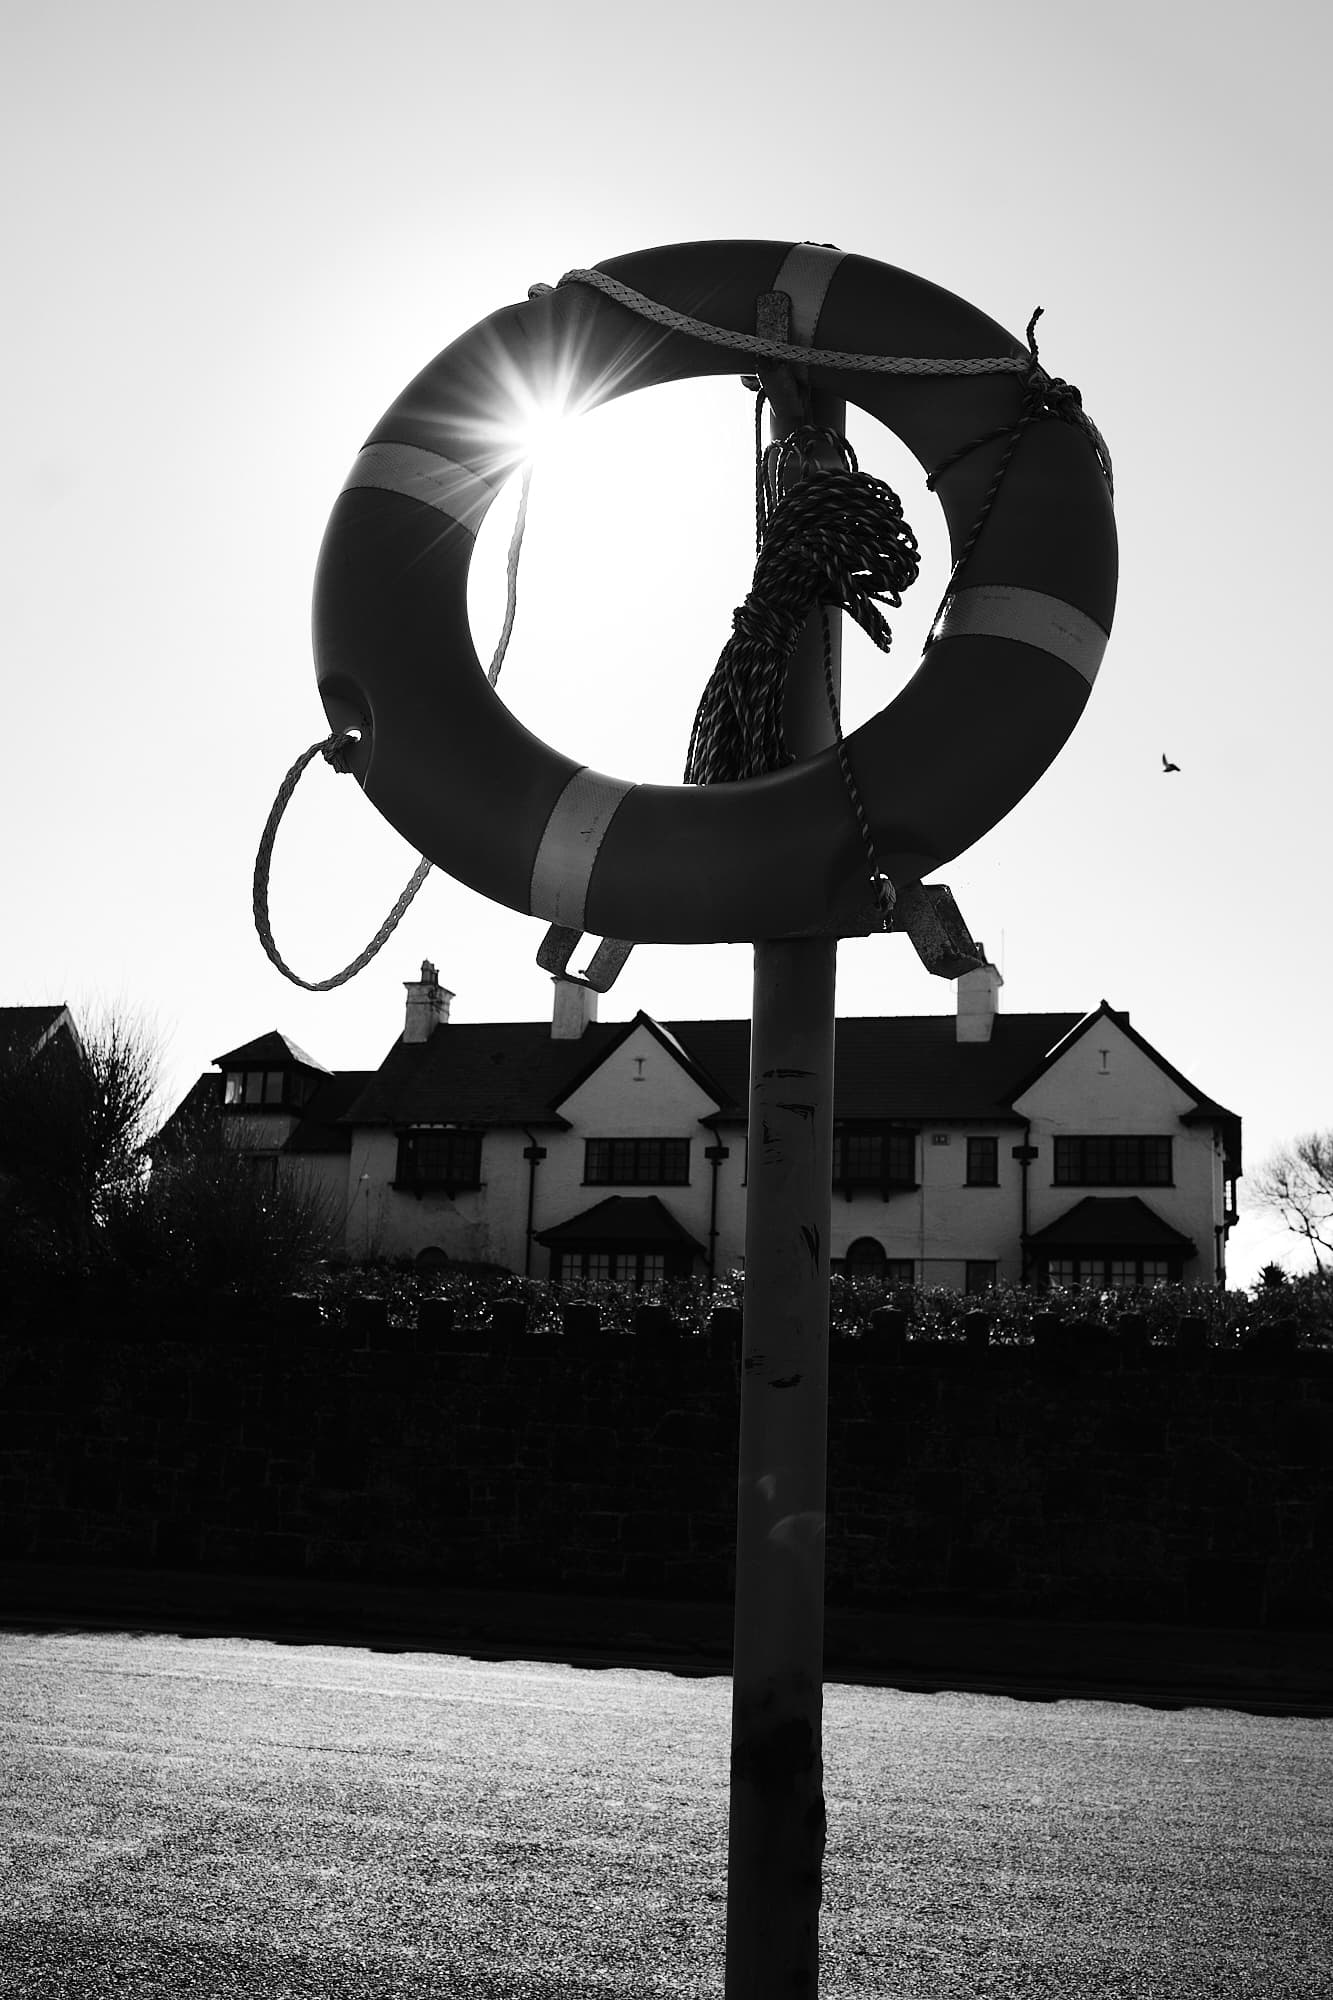 life buoy in front of the sun